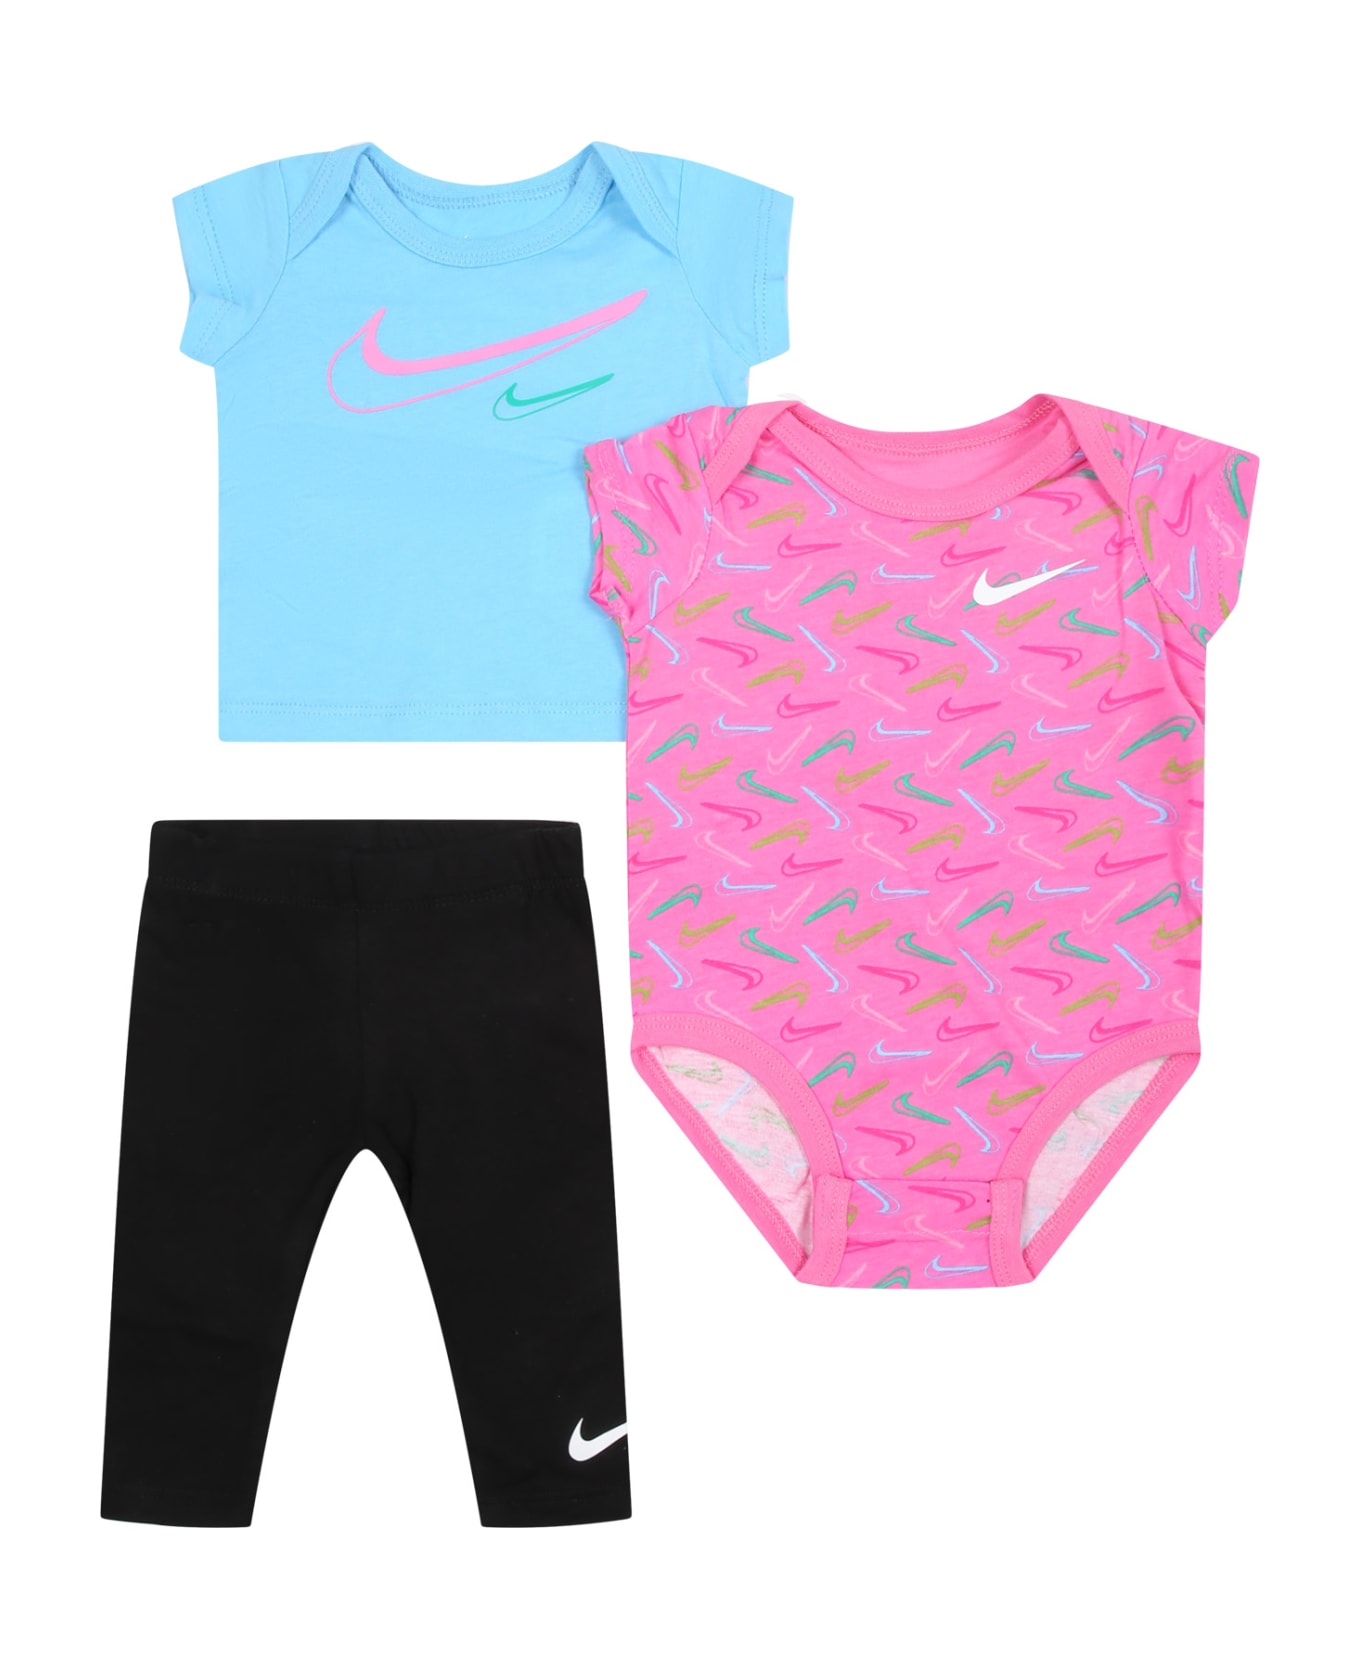 Nike Multicolor Suit For Baby Girl With Swoosh - Multicolor ボトムス